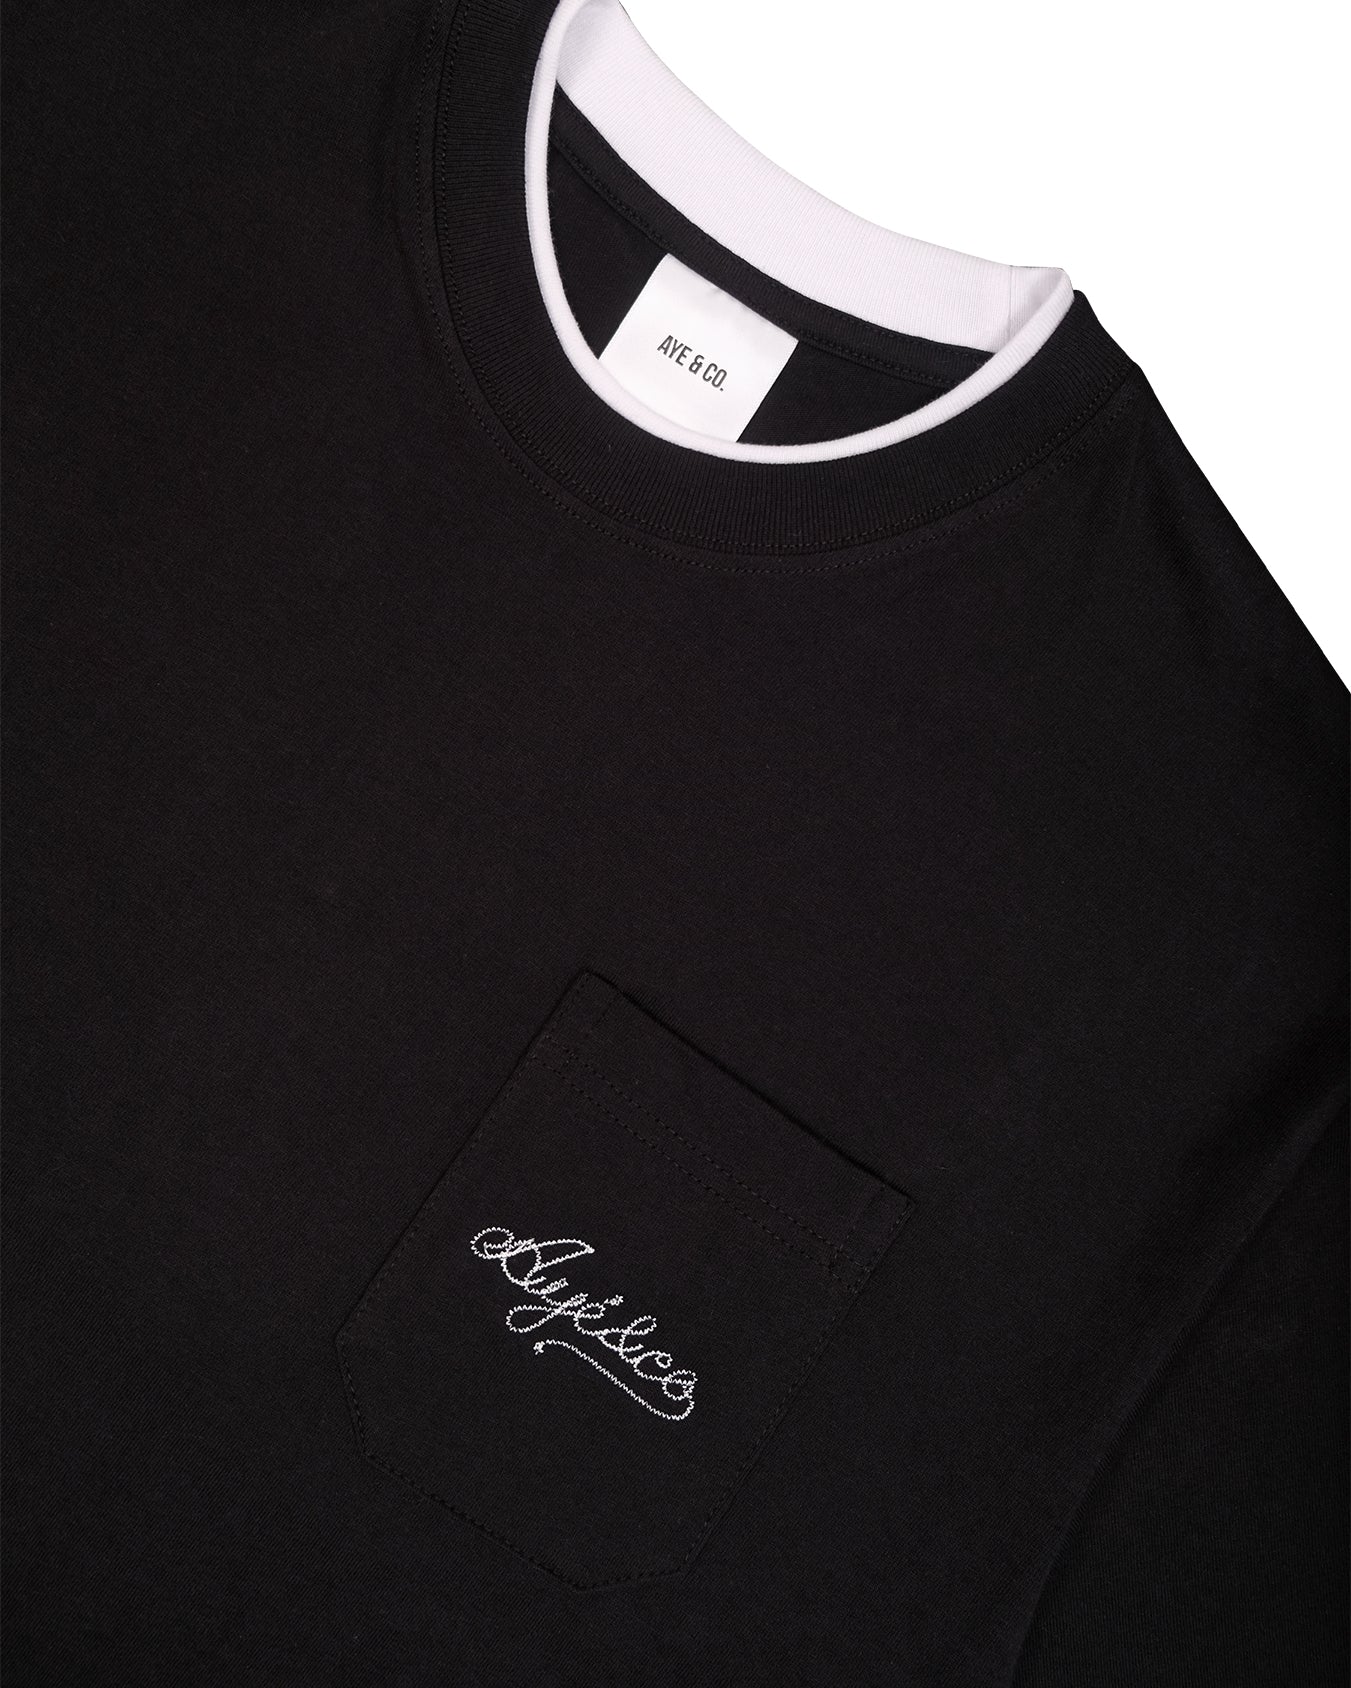 Macto Black Relaxed Fit Tees